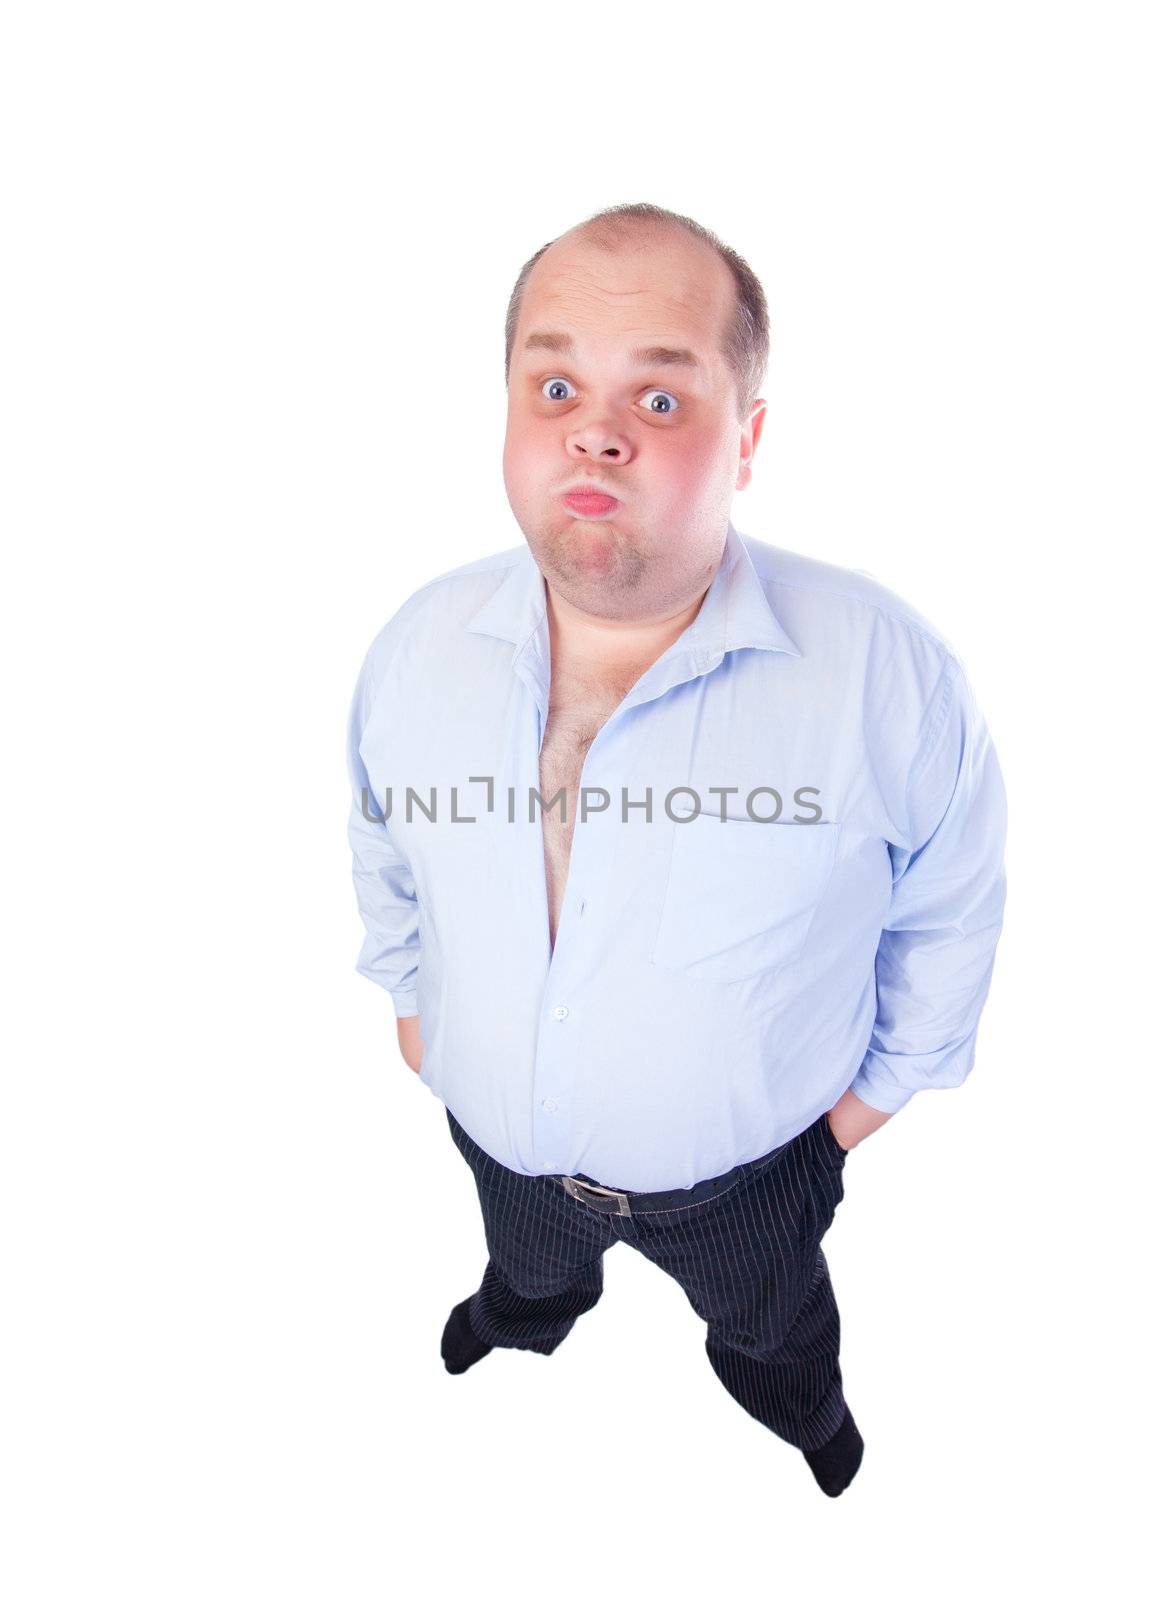 Fat Man in a Blue Shirt, Contorts Antics, wide-angle top view, isolated